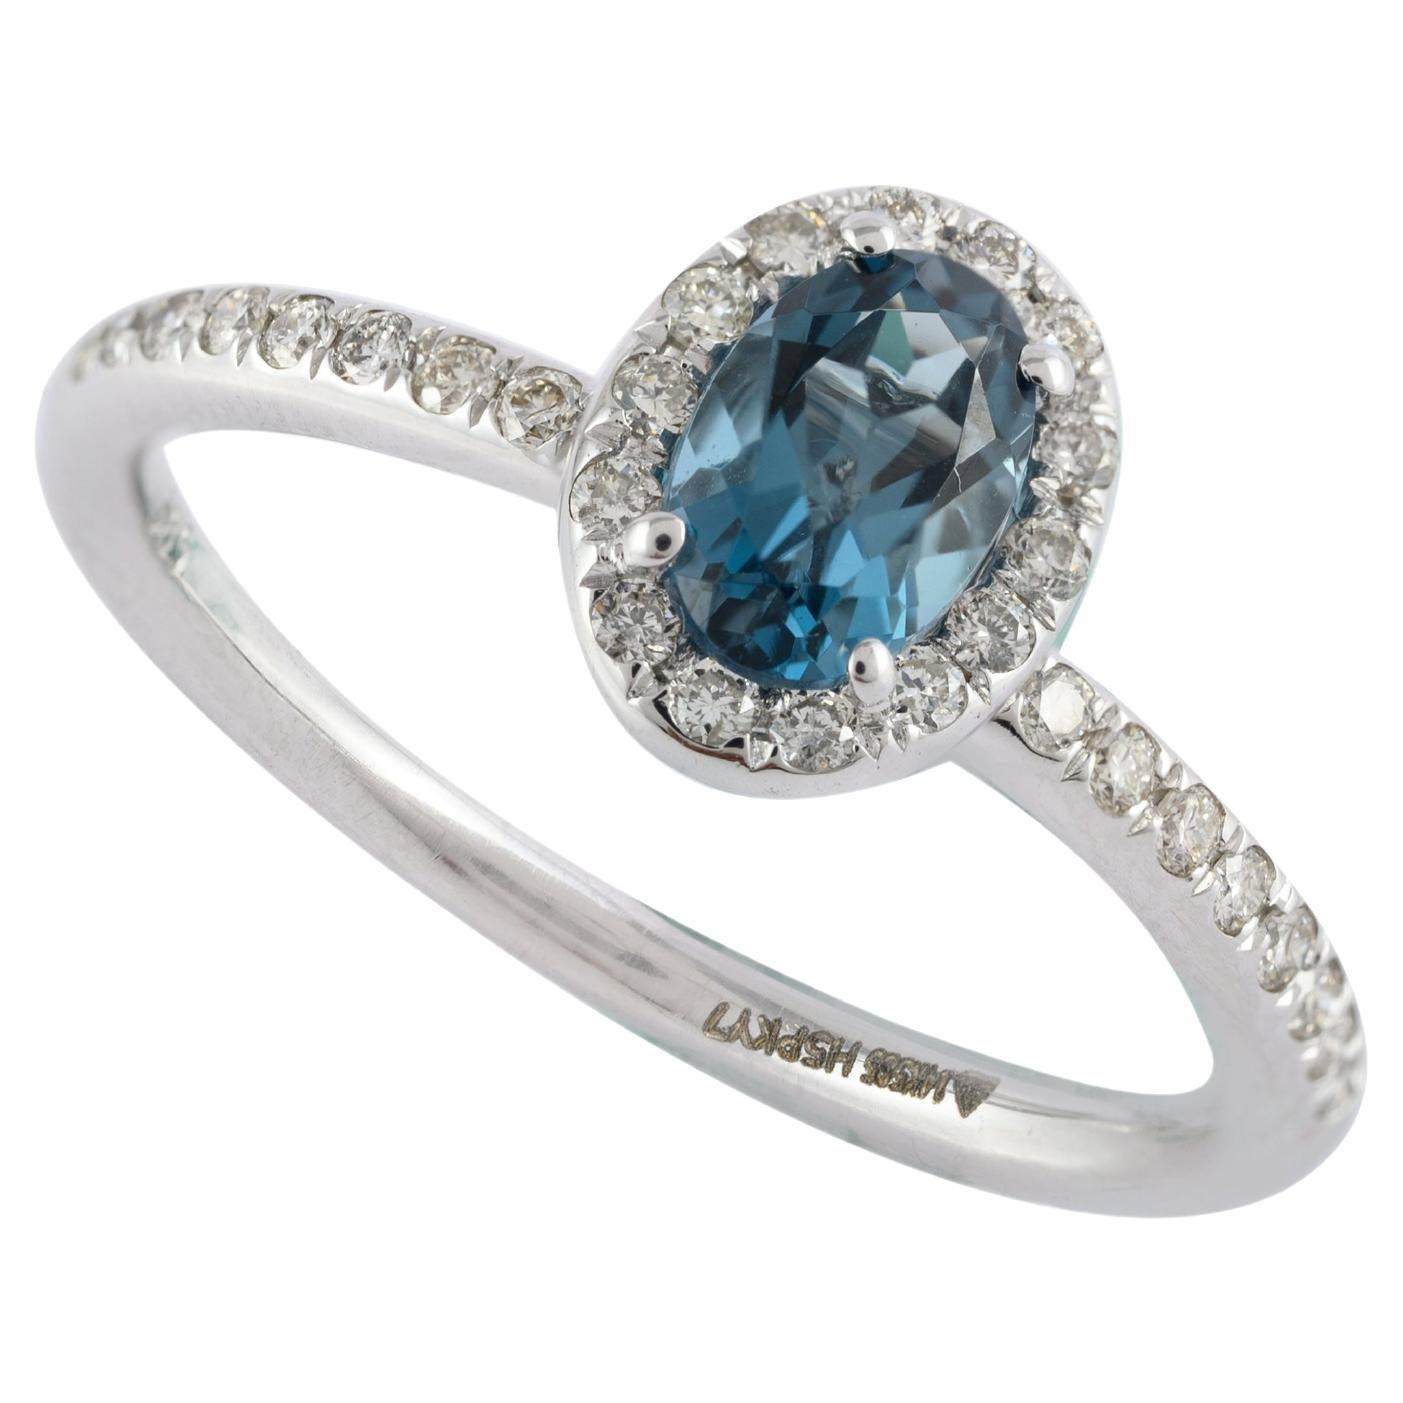 For Sale:  Natural 5.84 ct Blue Topaz and Halo Diamond Classic Ring in 14 Karat White Gold